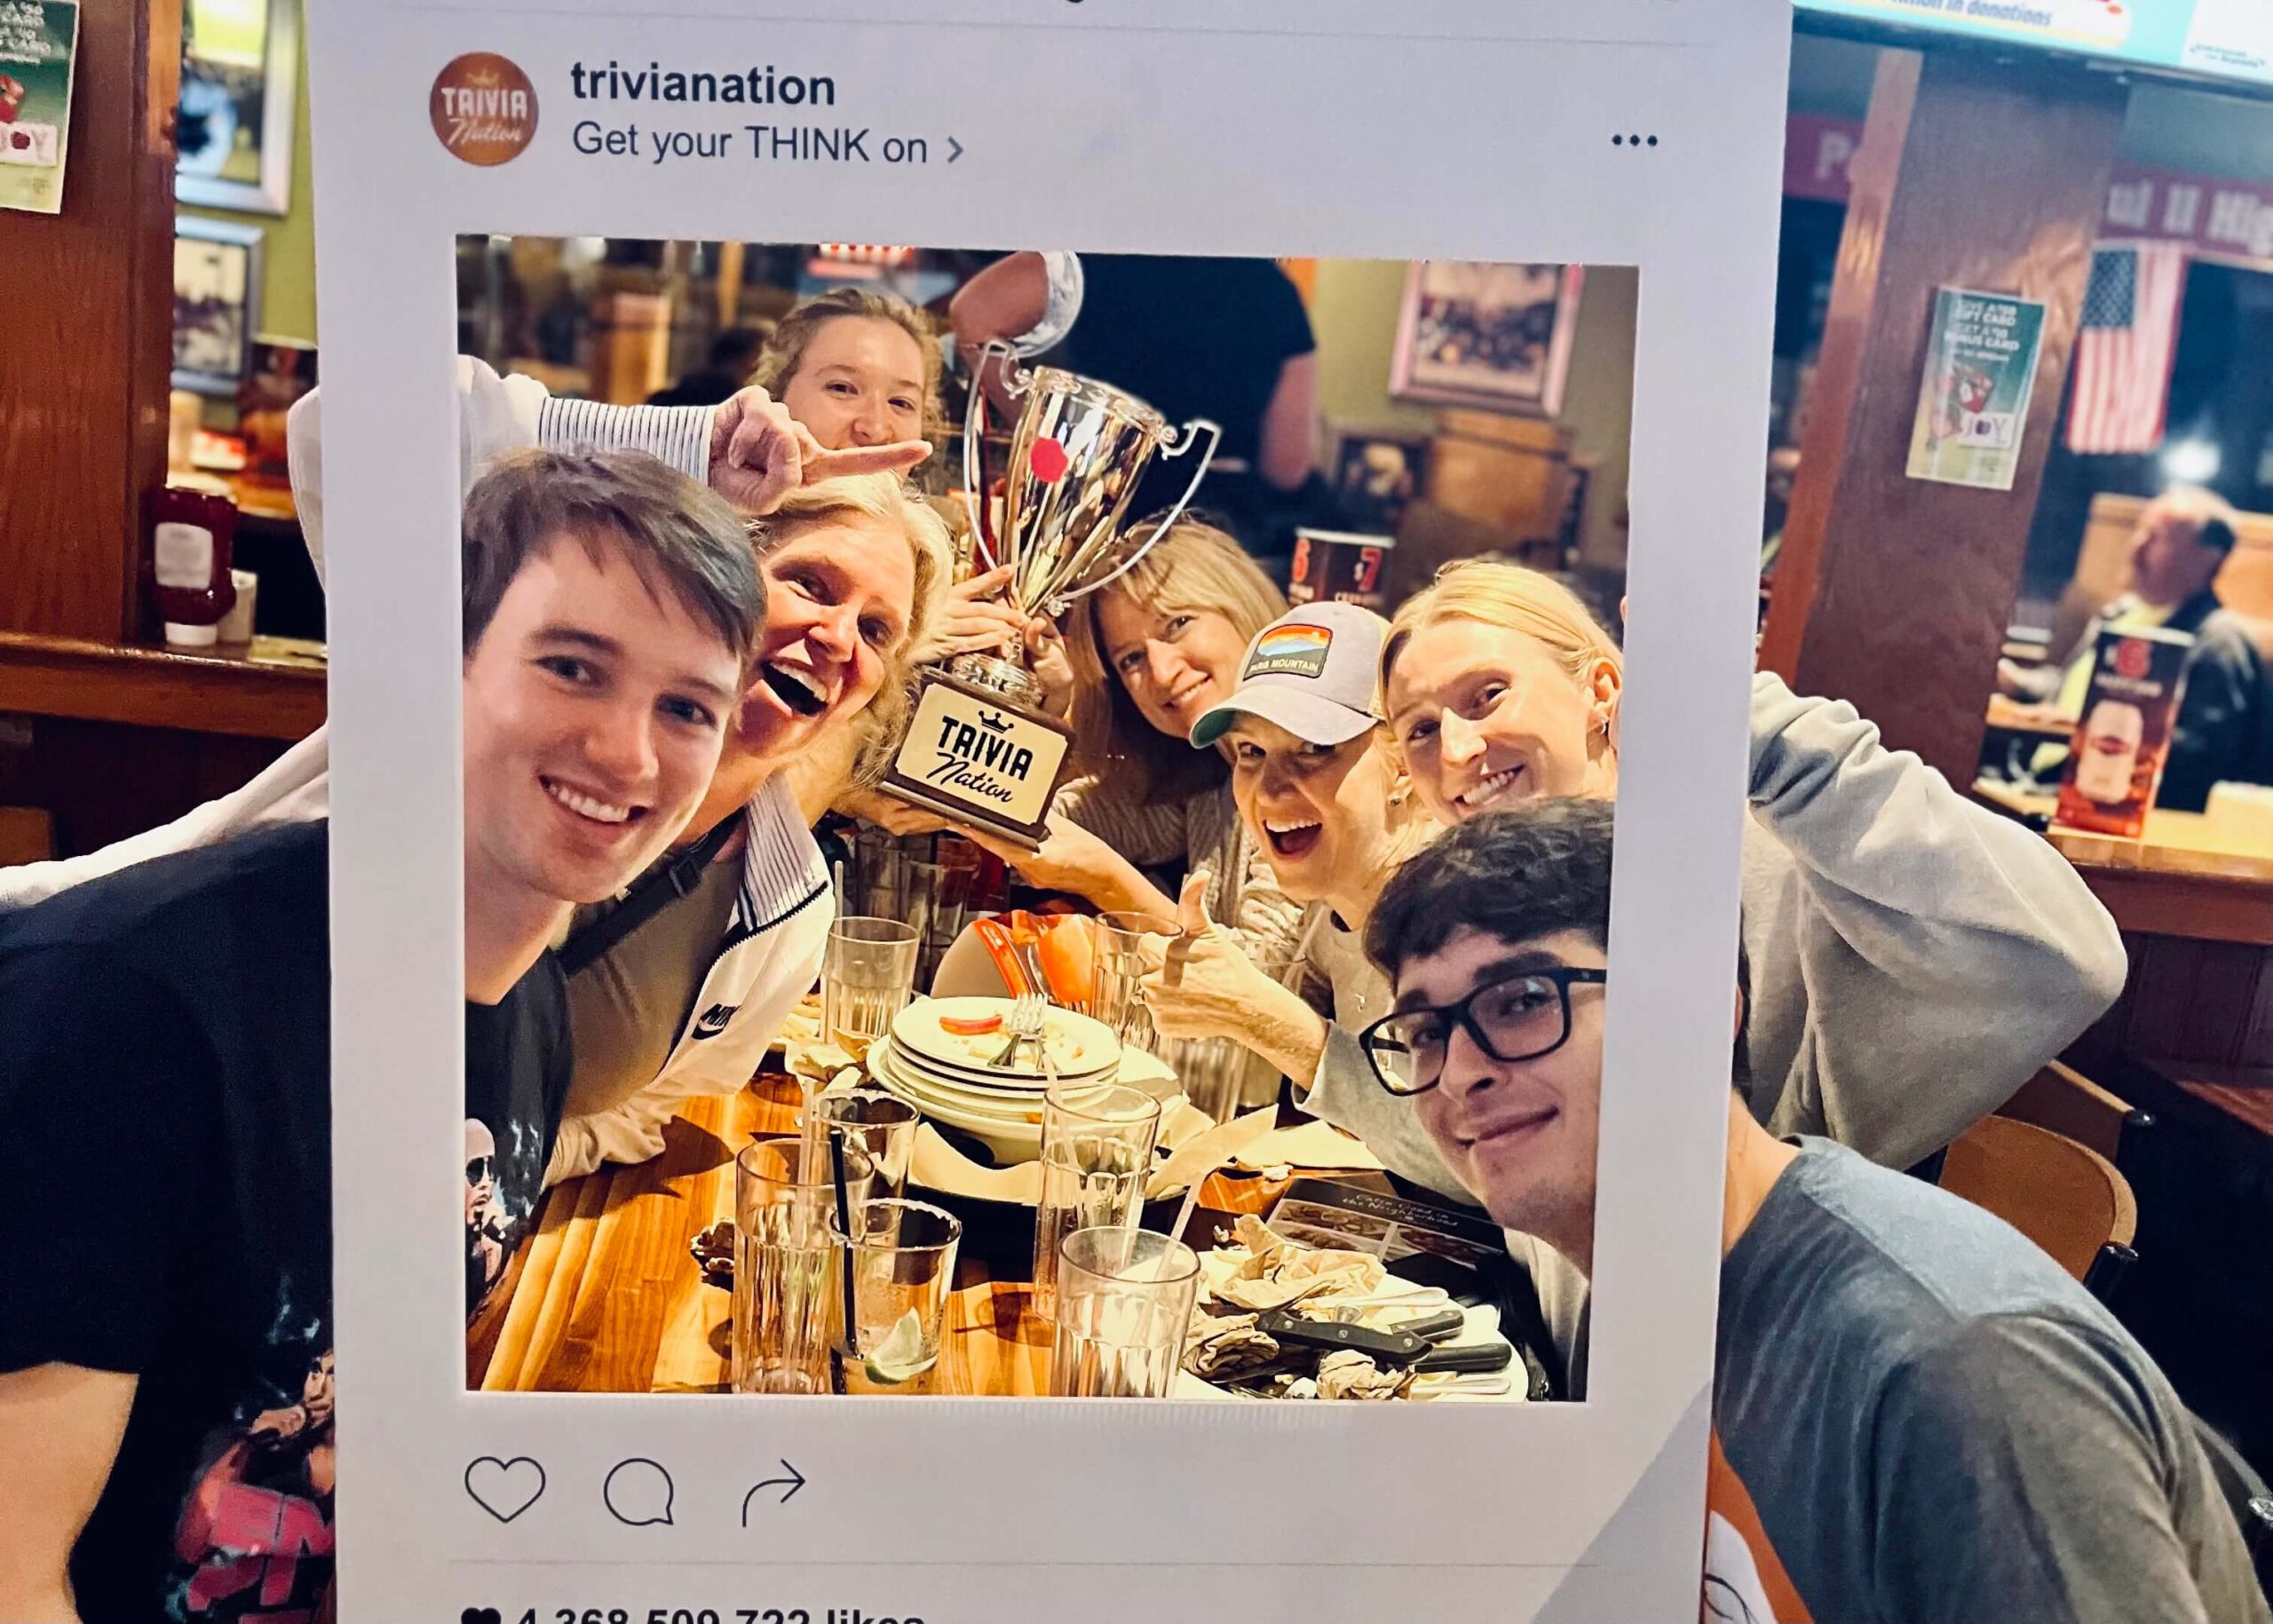 Applebee's Grill & Bar Delray Beach FL 33446 trivia night: group of young adults and women gathered together around a table smiling and making excited expression with a Trivia Nation trophy and Instagram polaroid prop